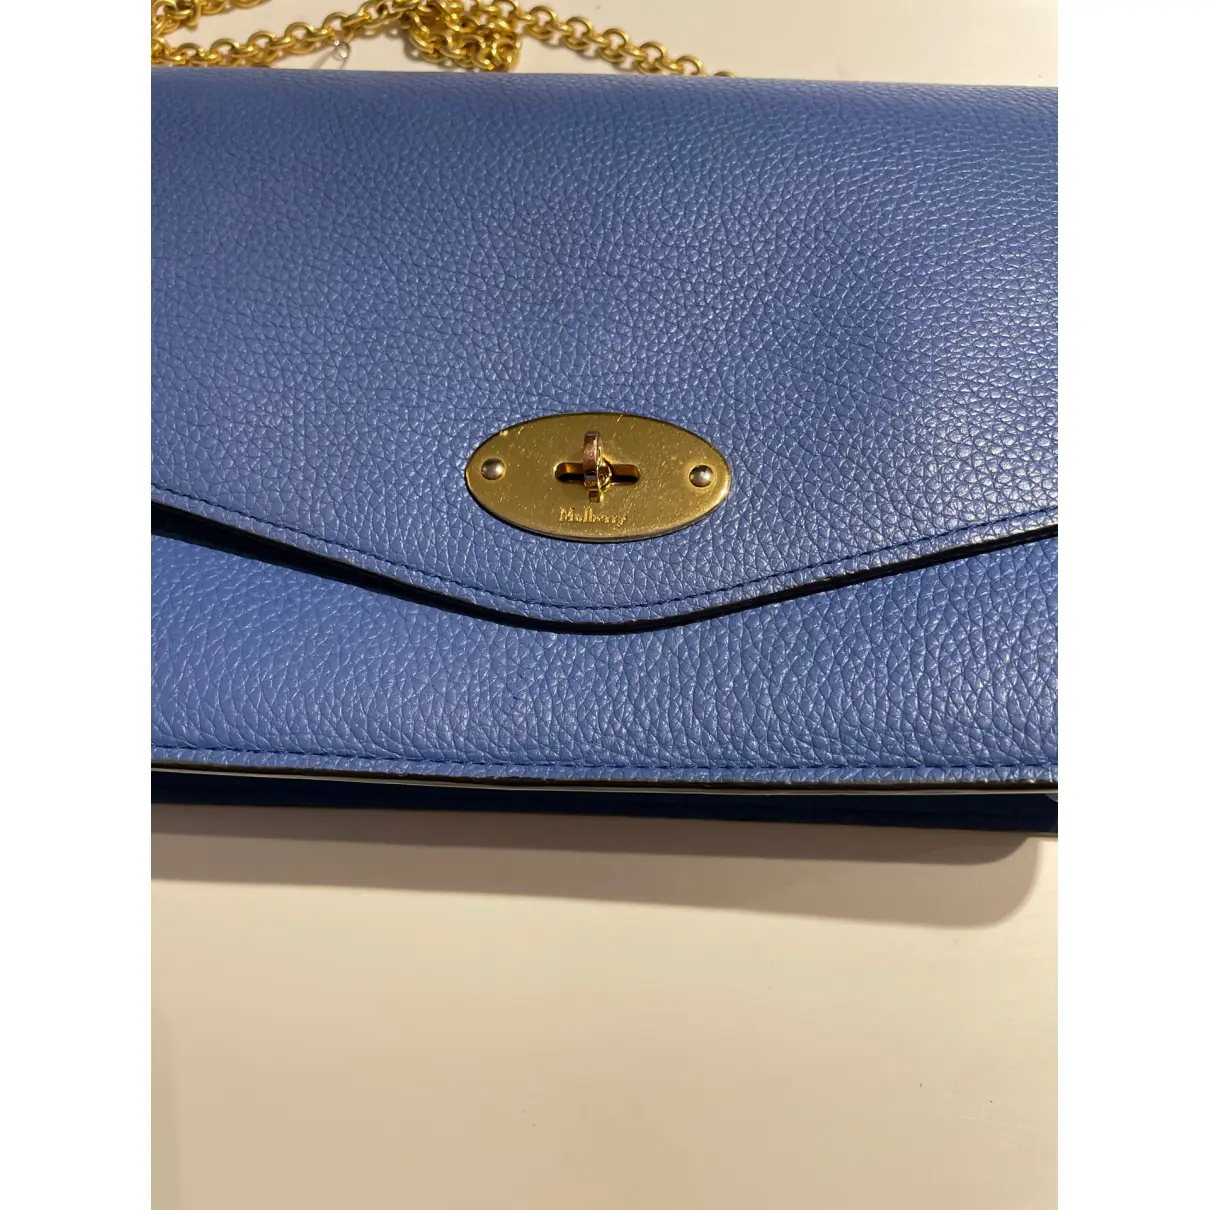 Buy Mulberry Darley leather clutch bag online